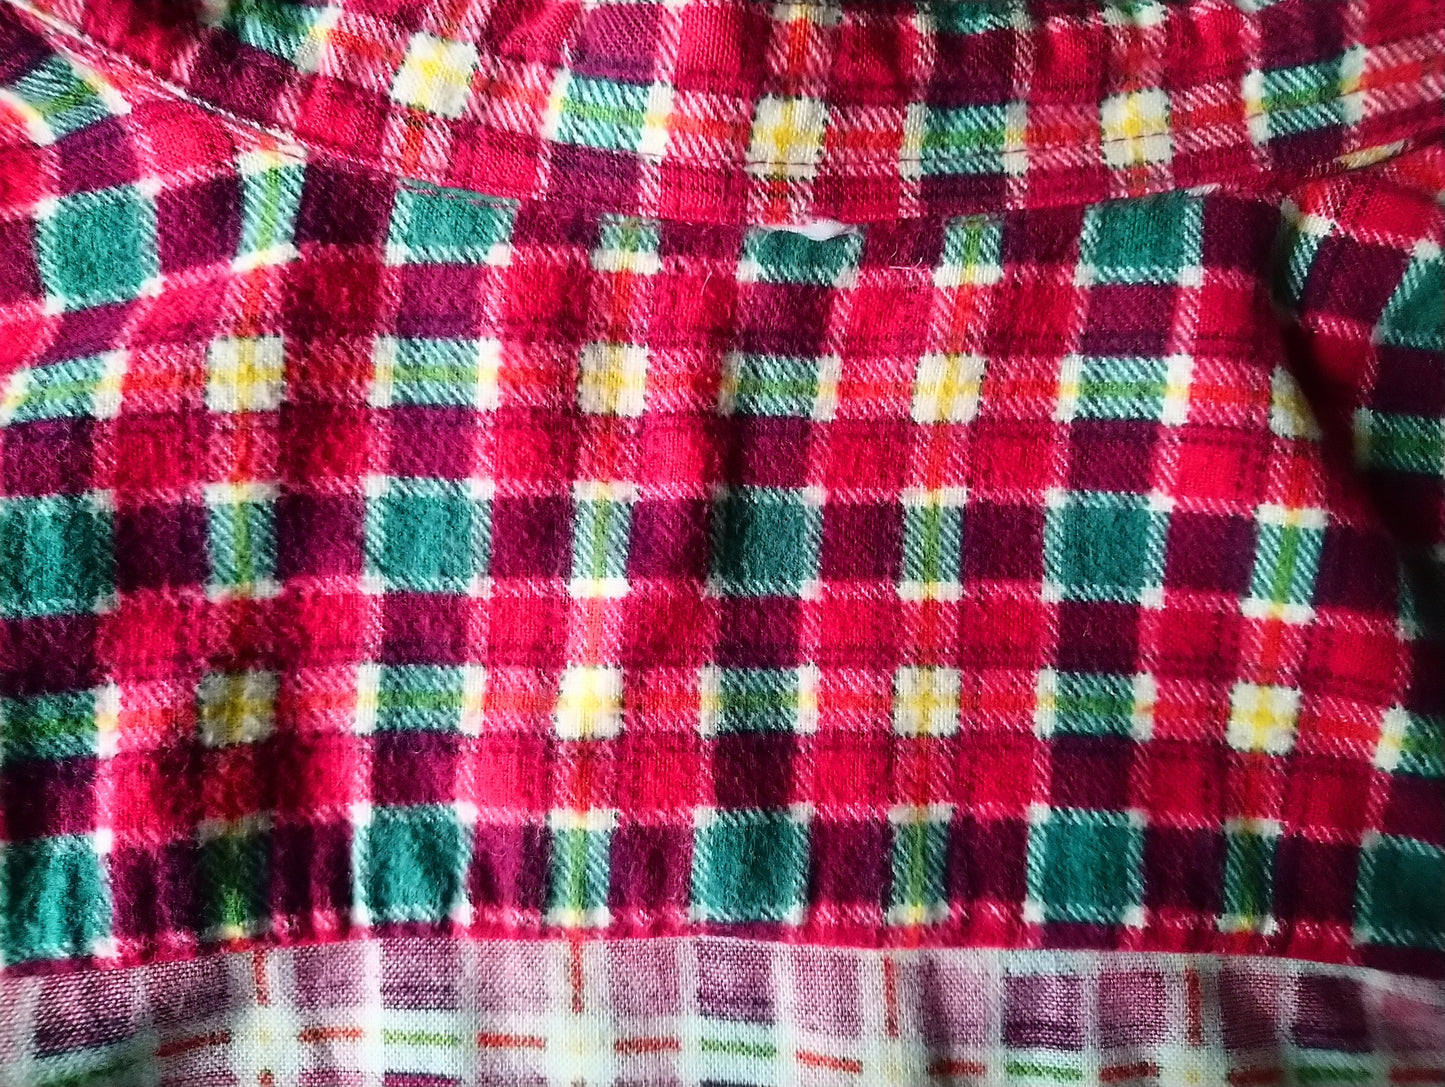 Vintage flannel shirt. Red green yellow checkered. Size XL.